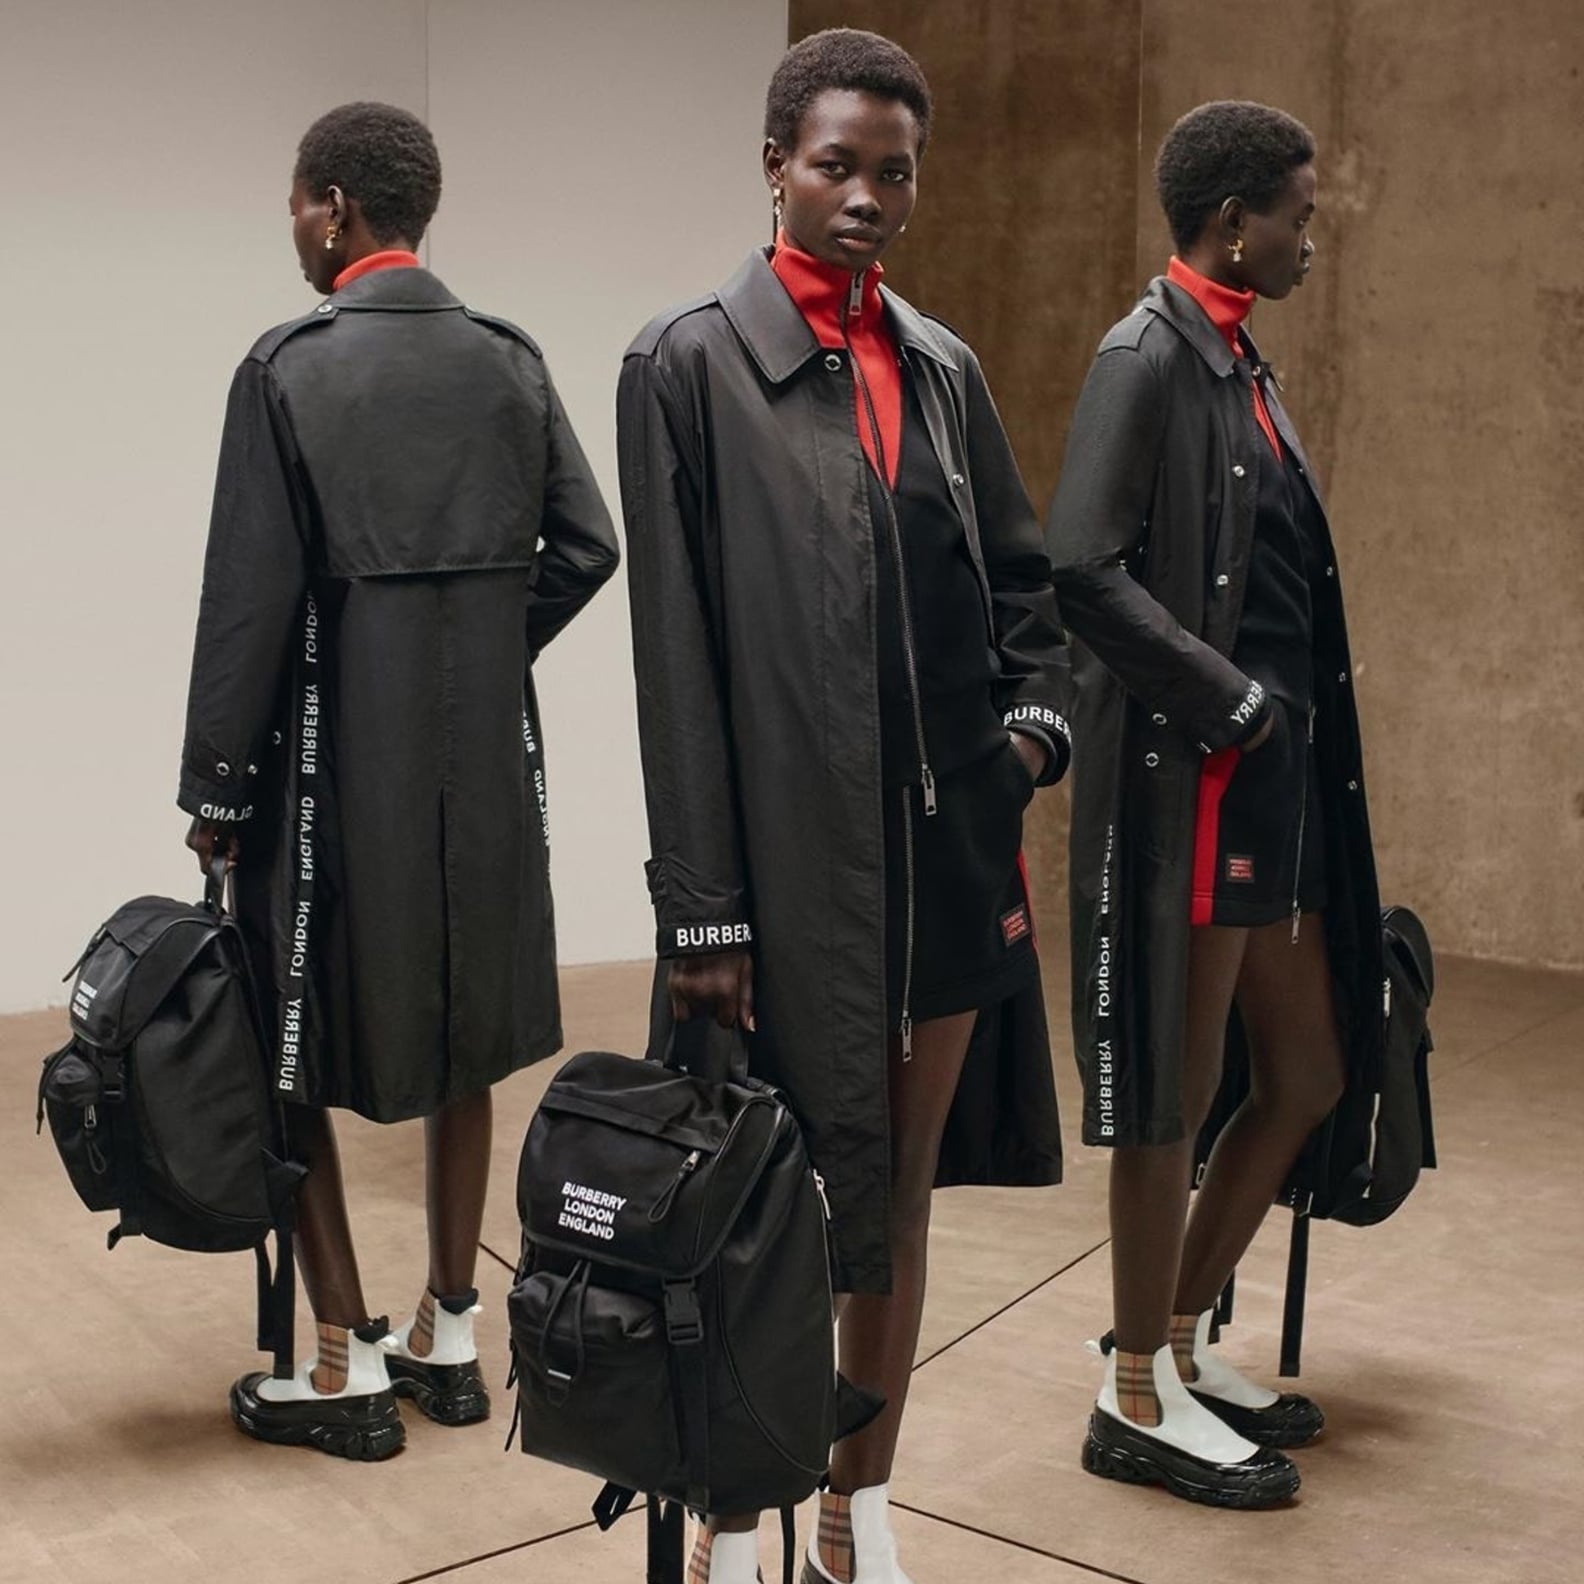 Burberry Launches ECONYL Sustainable Fashion Collection | POPSUGAR Fashion